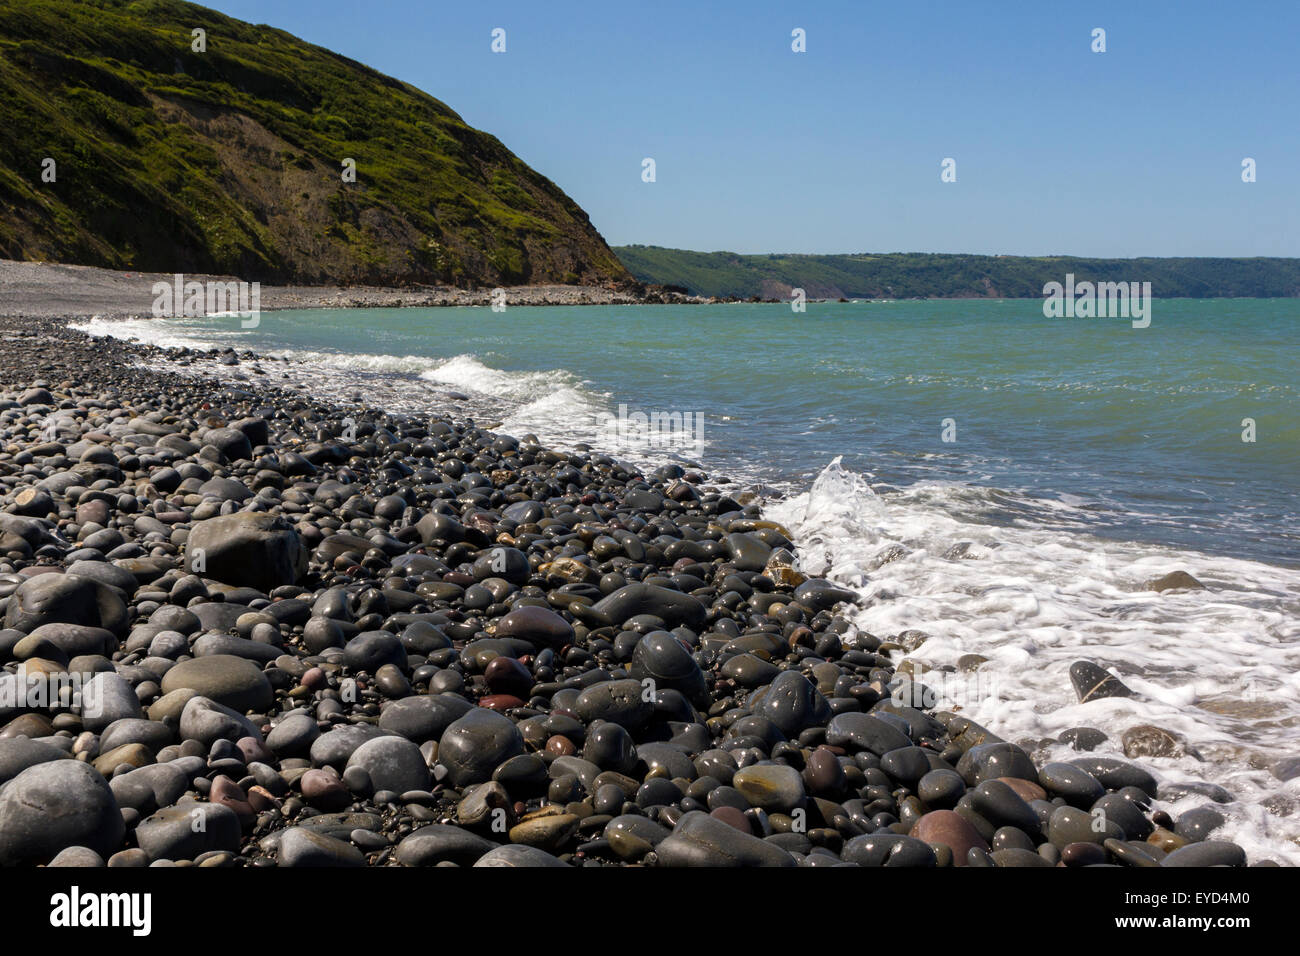 Greencliff Beach View at High Tide, Looking South West towards Bucks Mills, Devon, UK. Stock Photo